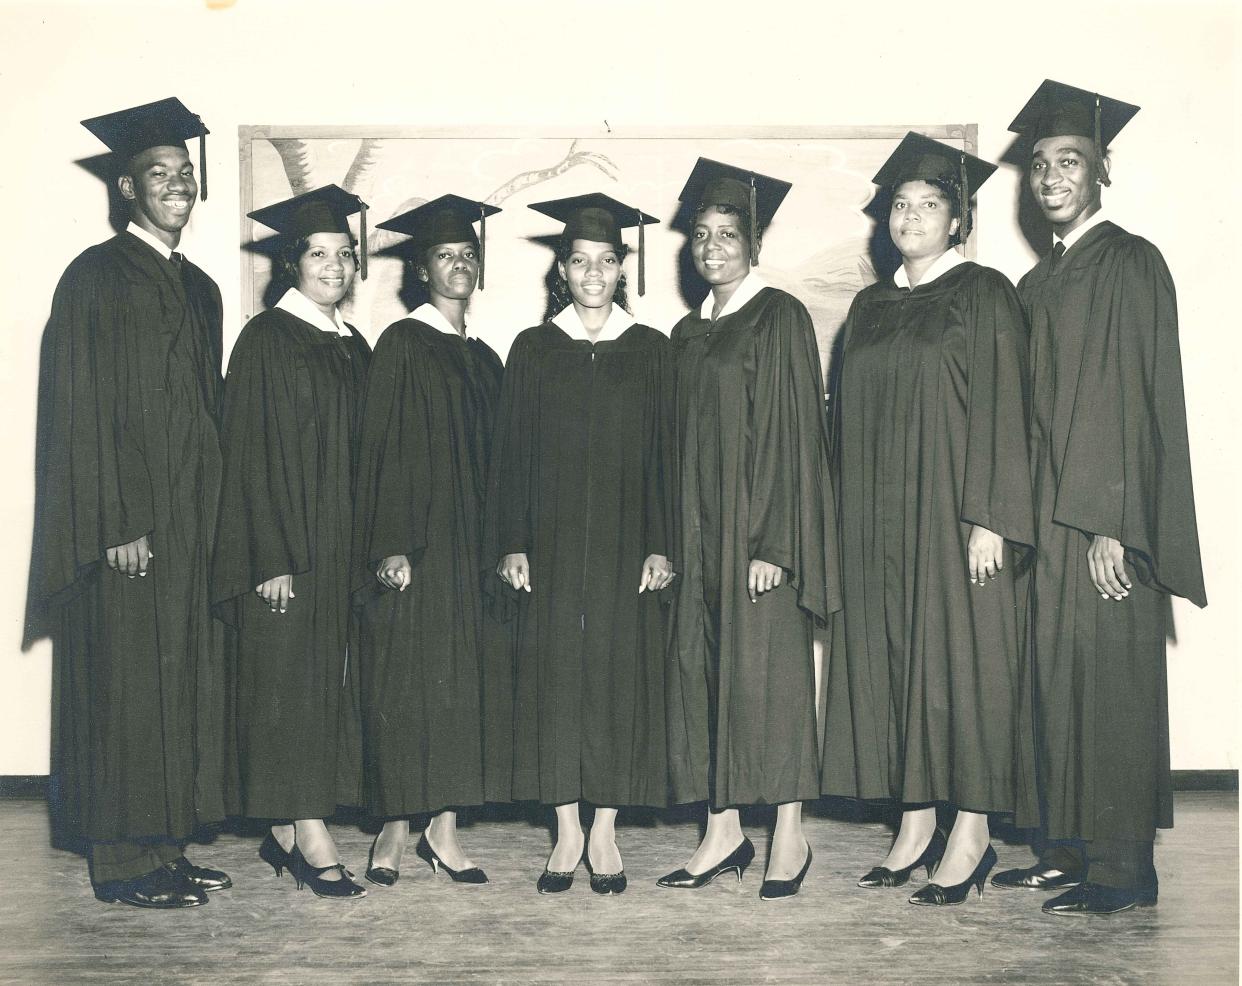 Roosevelt Junior College graduates from the Class of 1961.